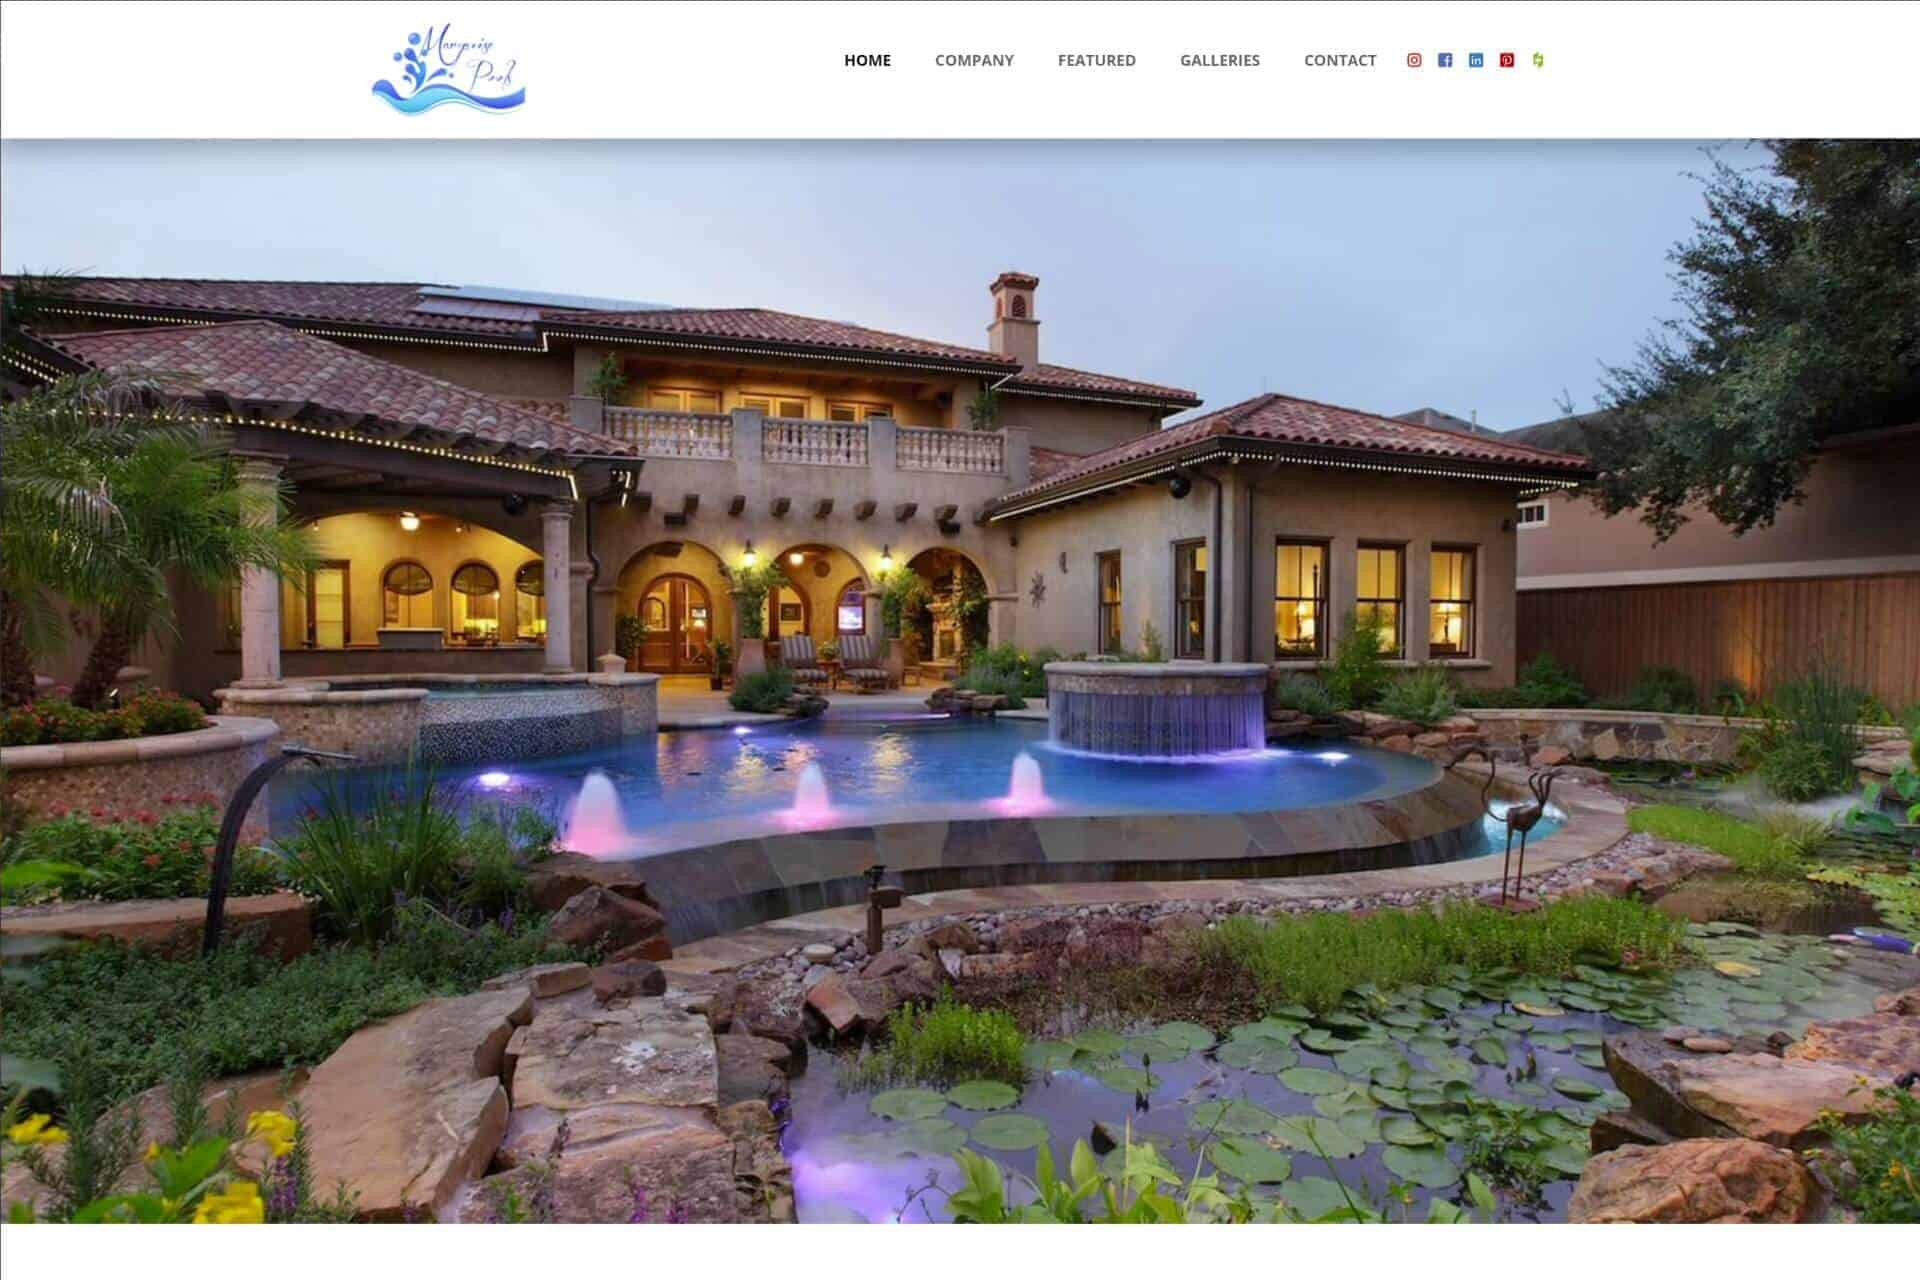 Marquise Pools The Woodlands Swimming Pool Builder - Website Links for Marquise Pools #1 Best Pool Builder